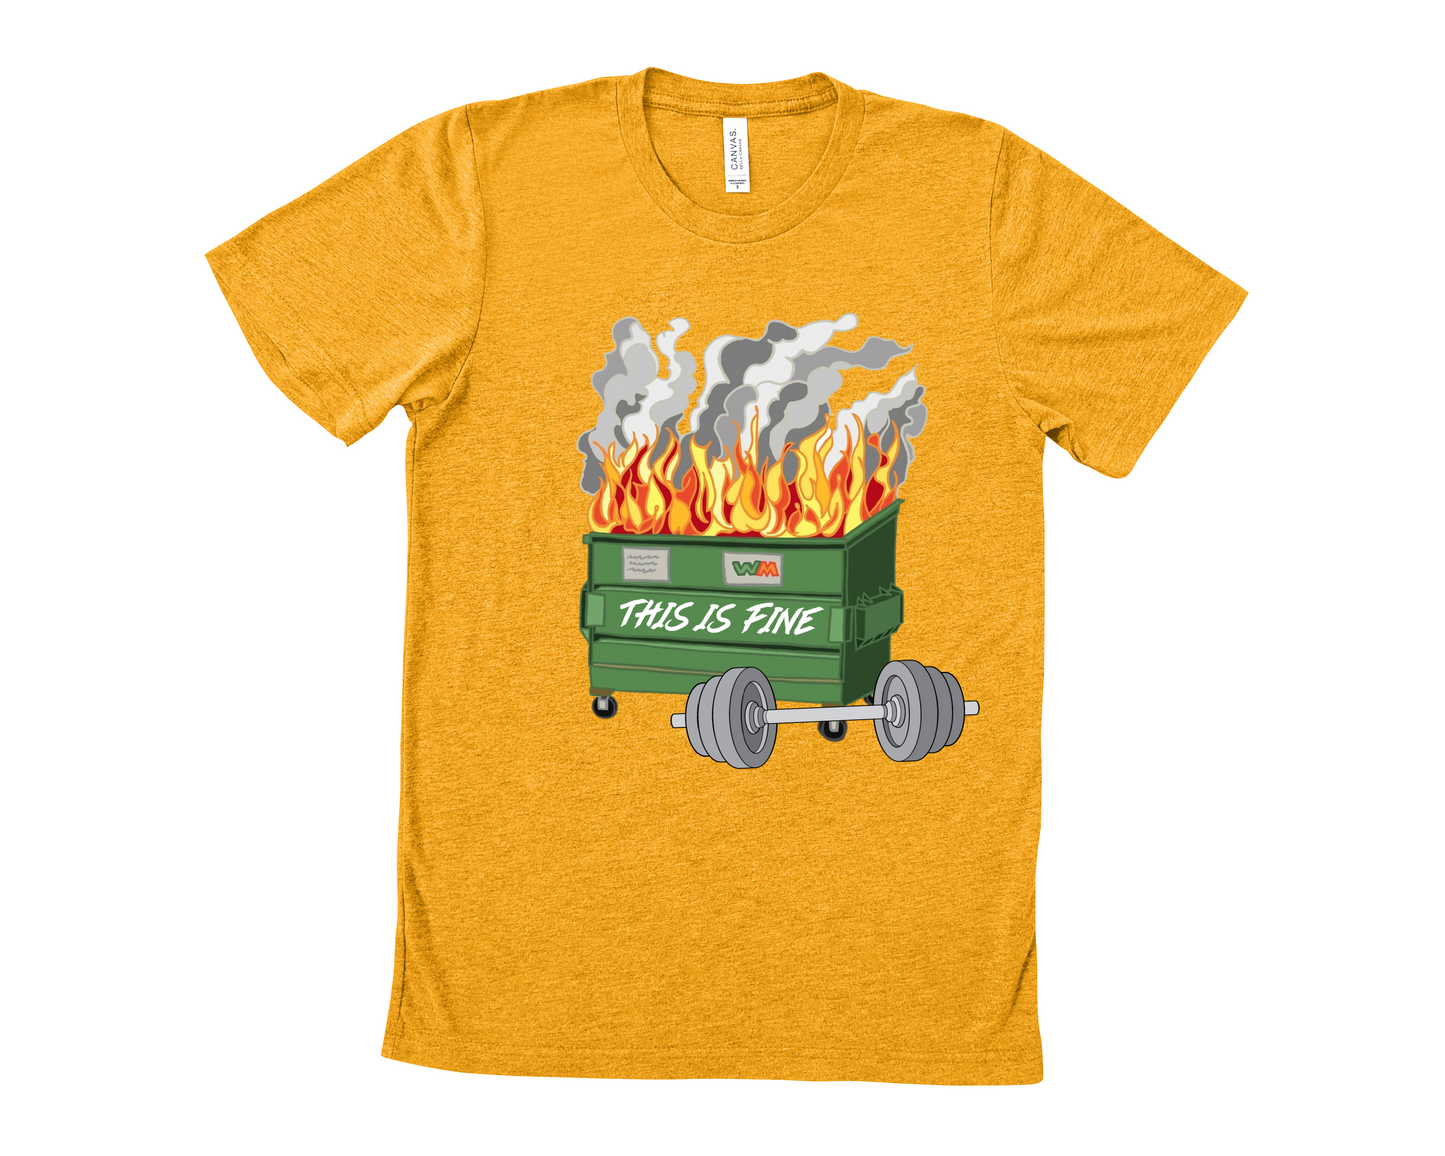 Dumpster Fire Shirts/ Tee or Cropped Tank